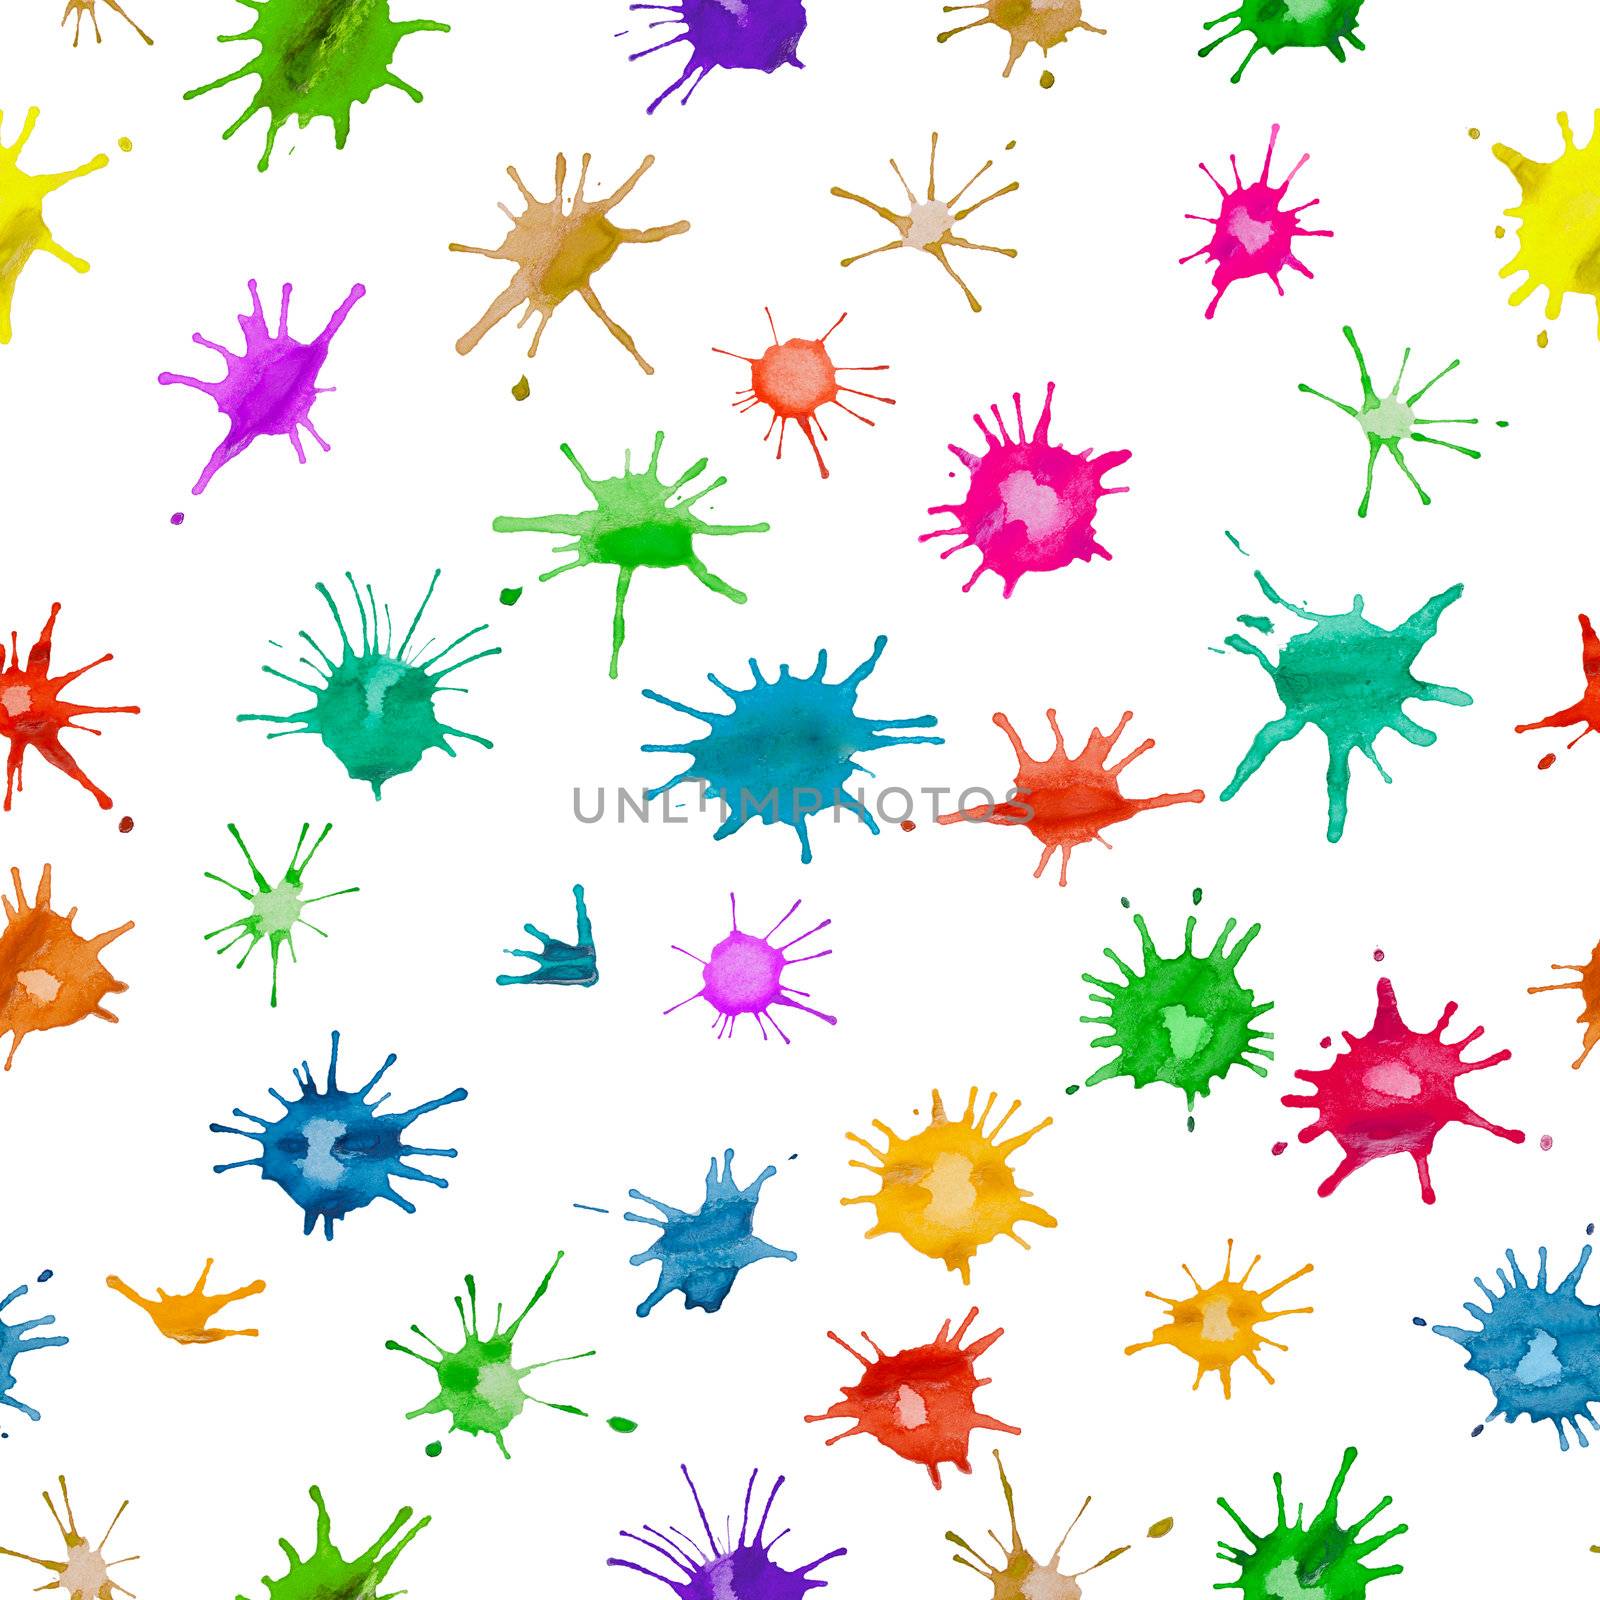 Multicolored blots on a white background - seamless texture